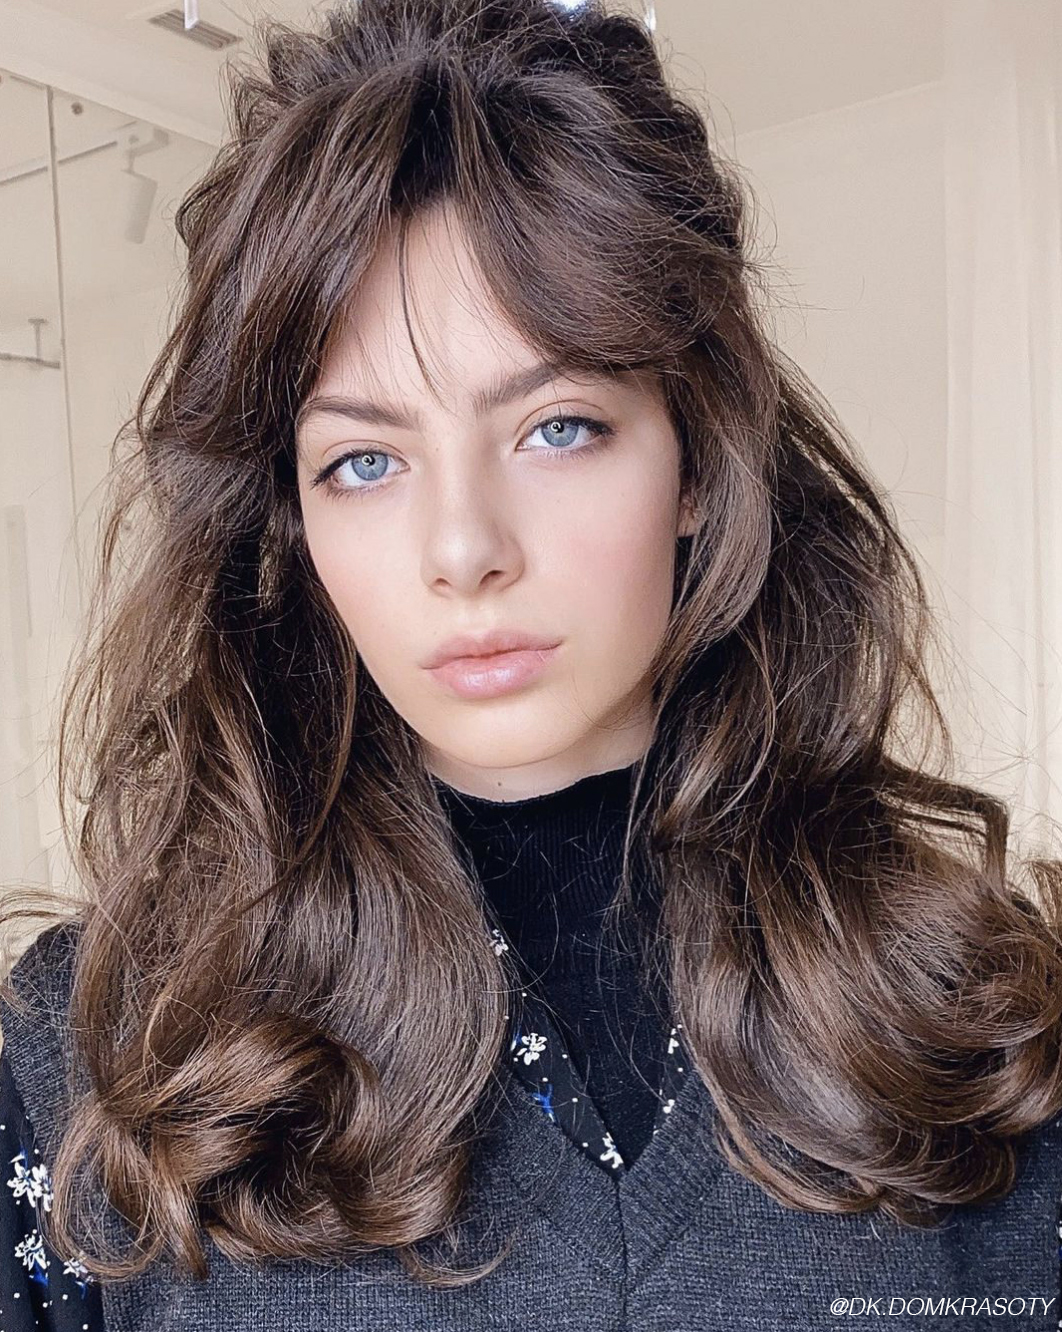 13 No-Fuss Hairstyles That Are Shockingly Pretty (and Easy!) – SheKnows